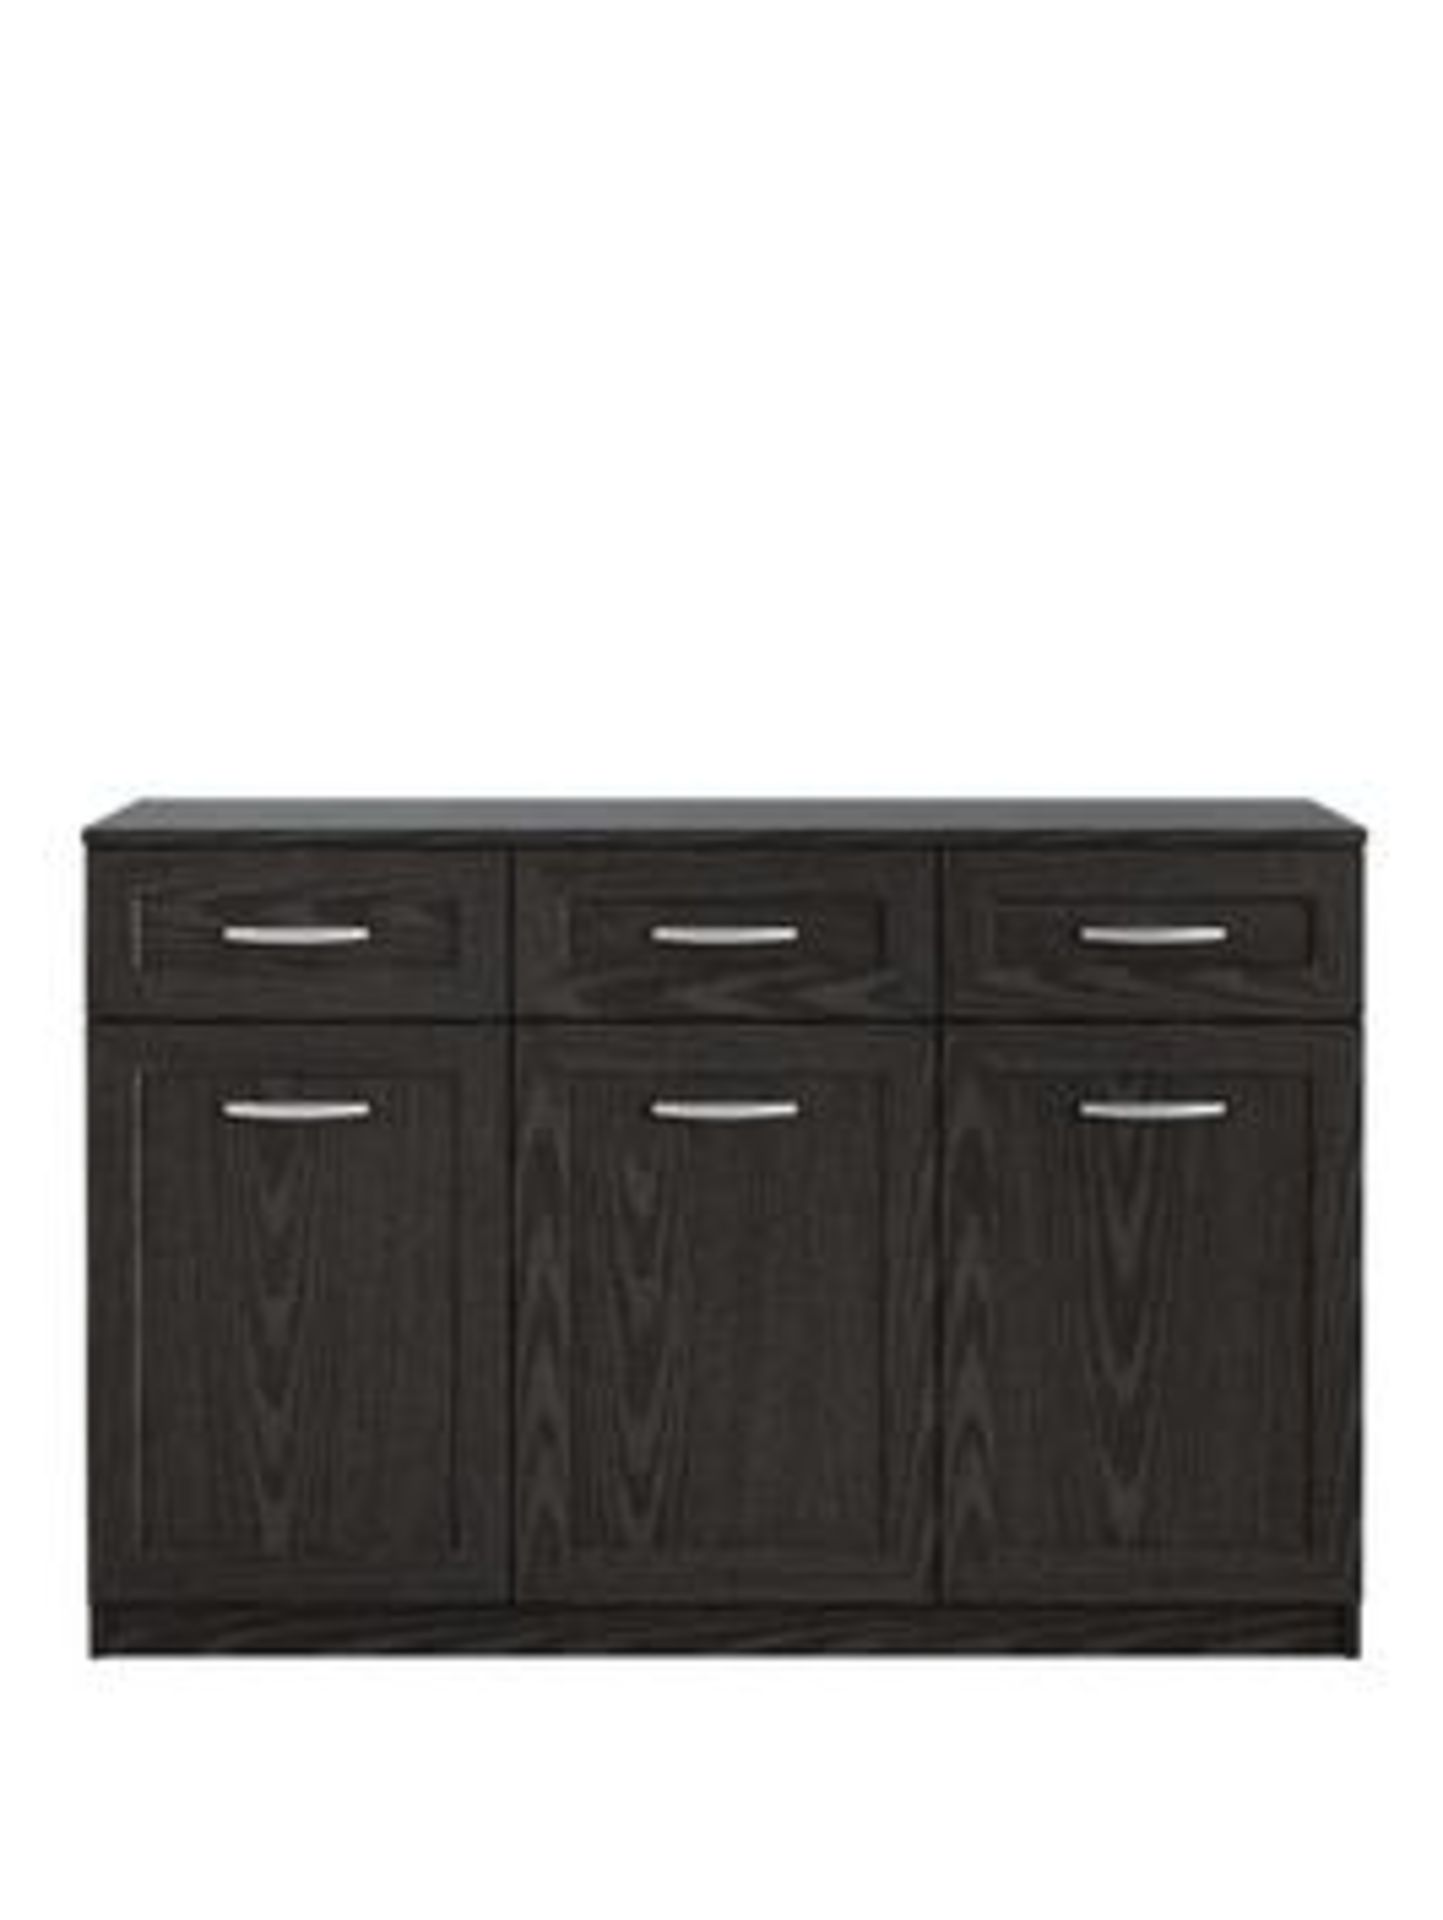 Oslo Sideboard 3drw 3dr in black ash 1 of 1